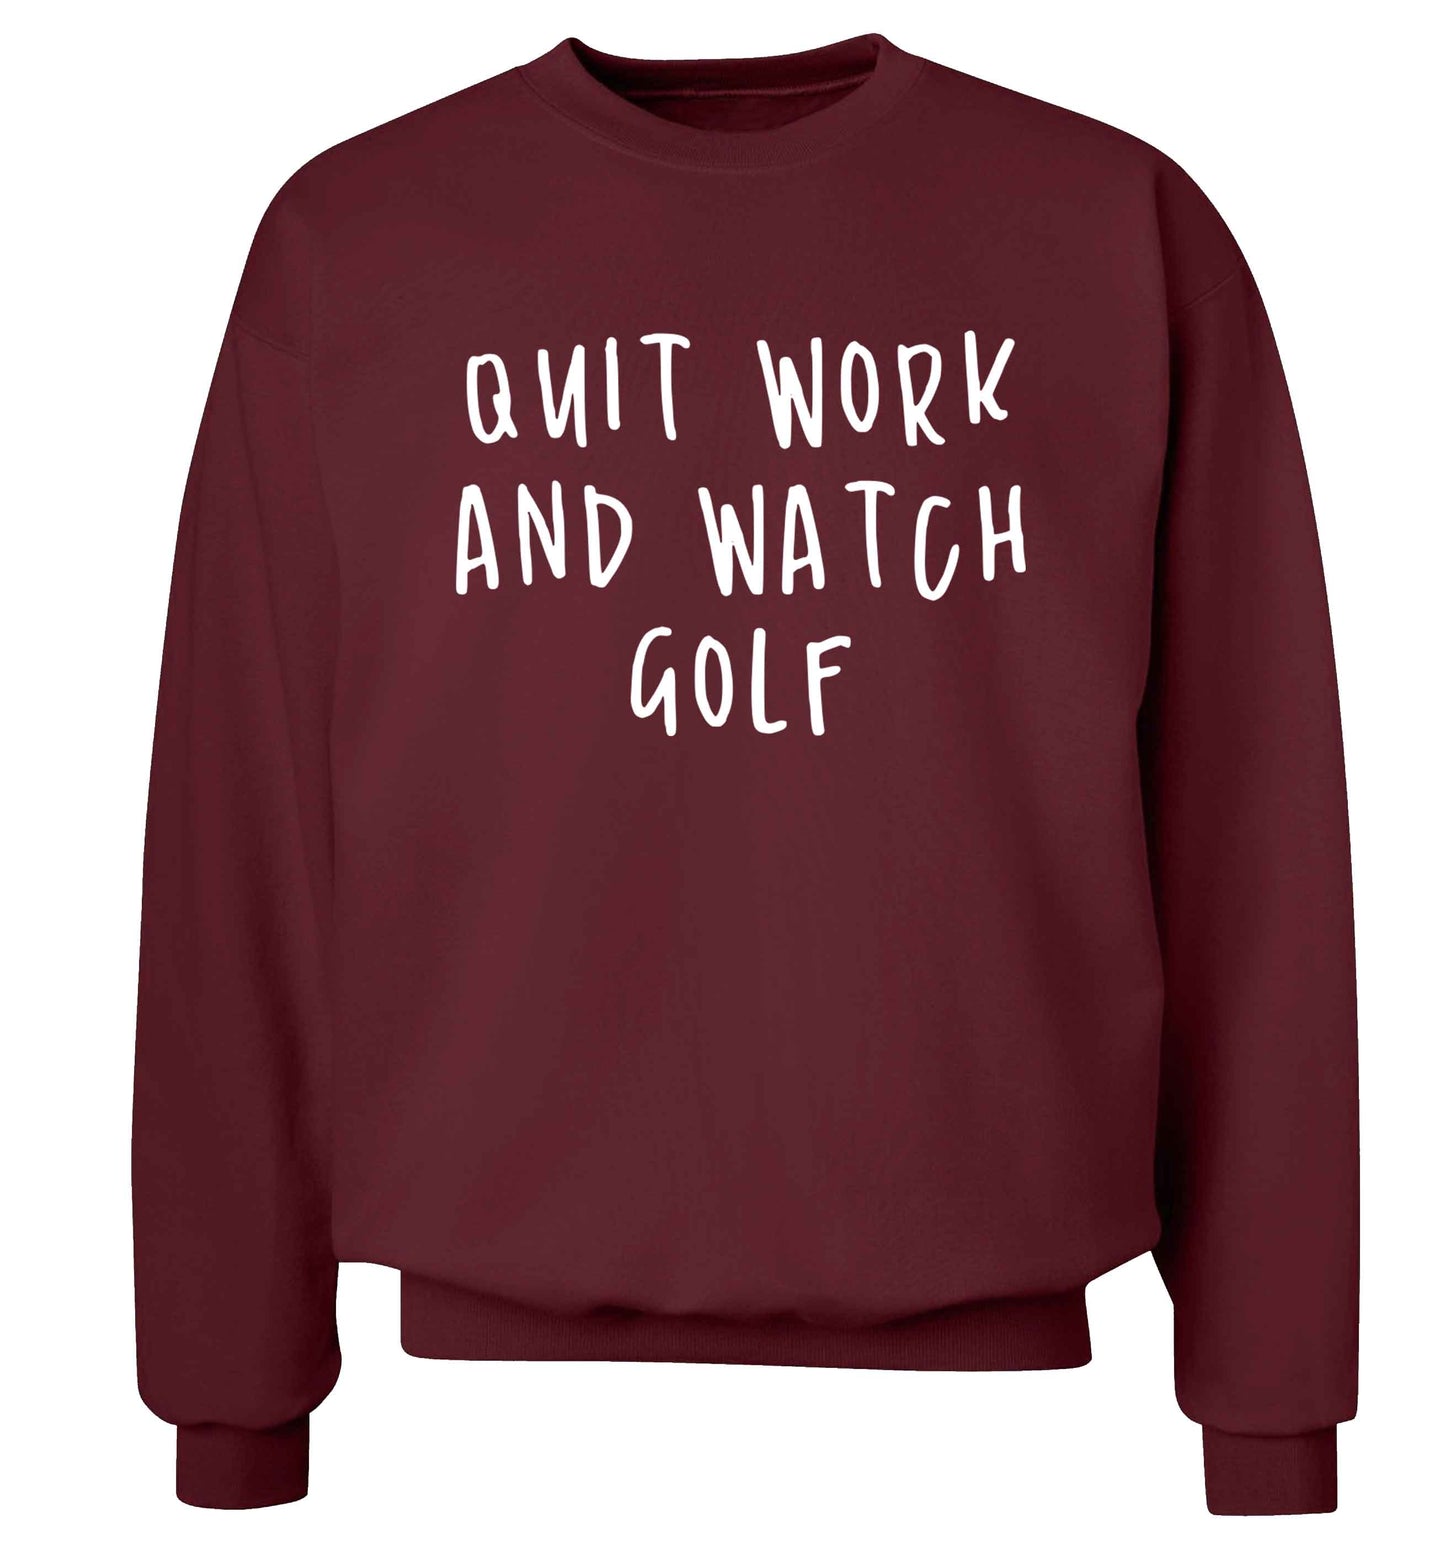 Quit work and watch golf Adult's unisex maroon Sweater 2XL